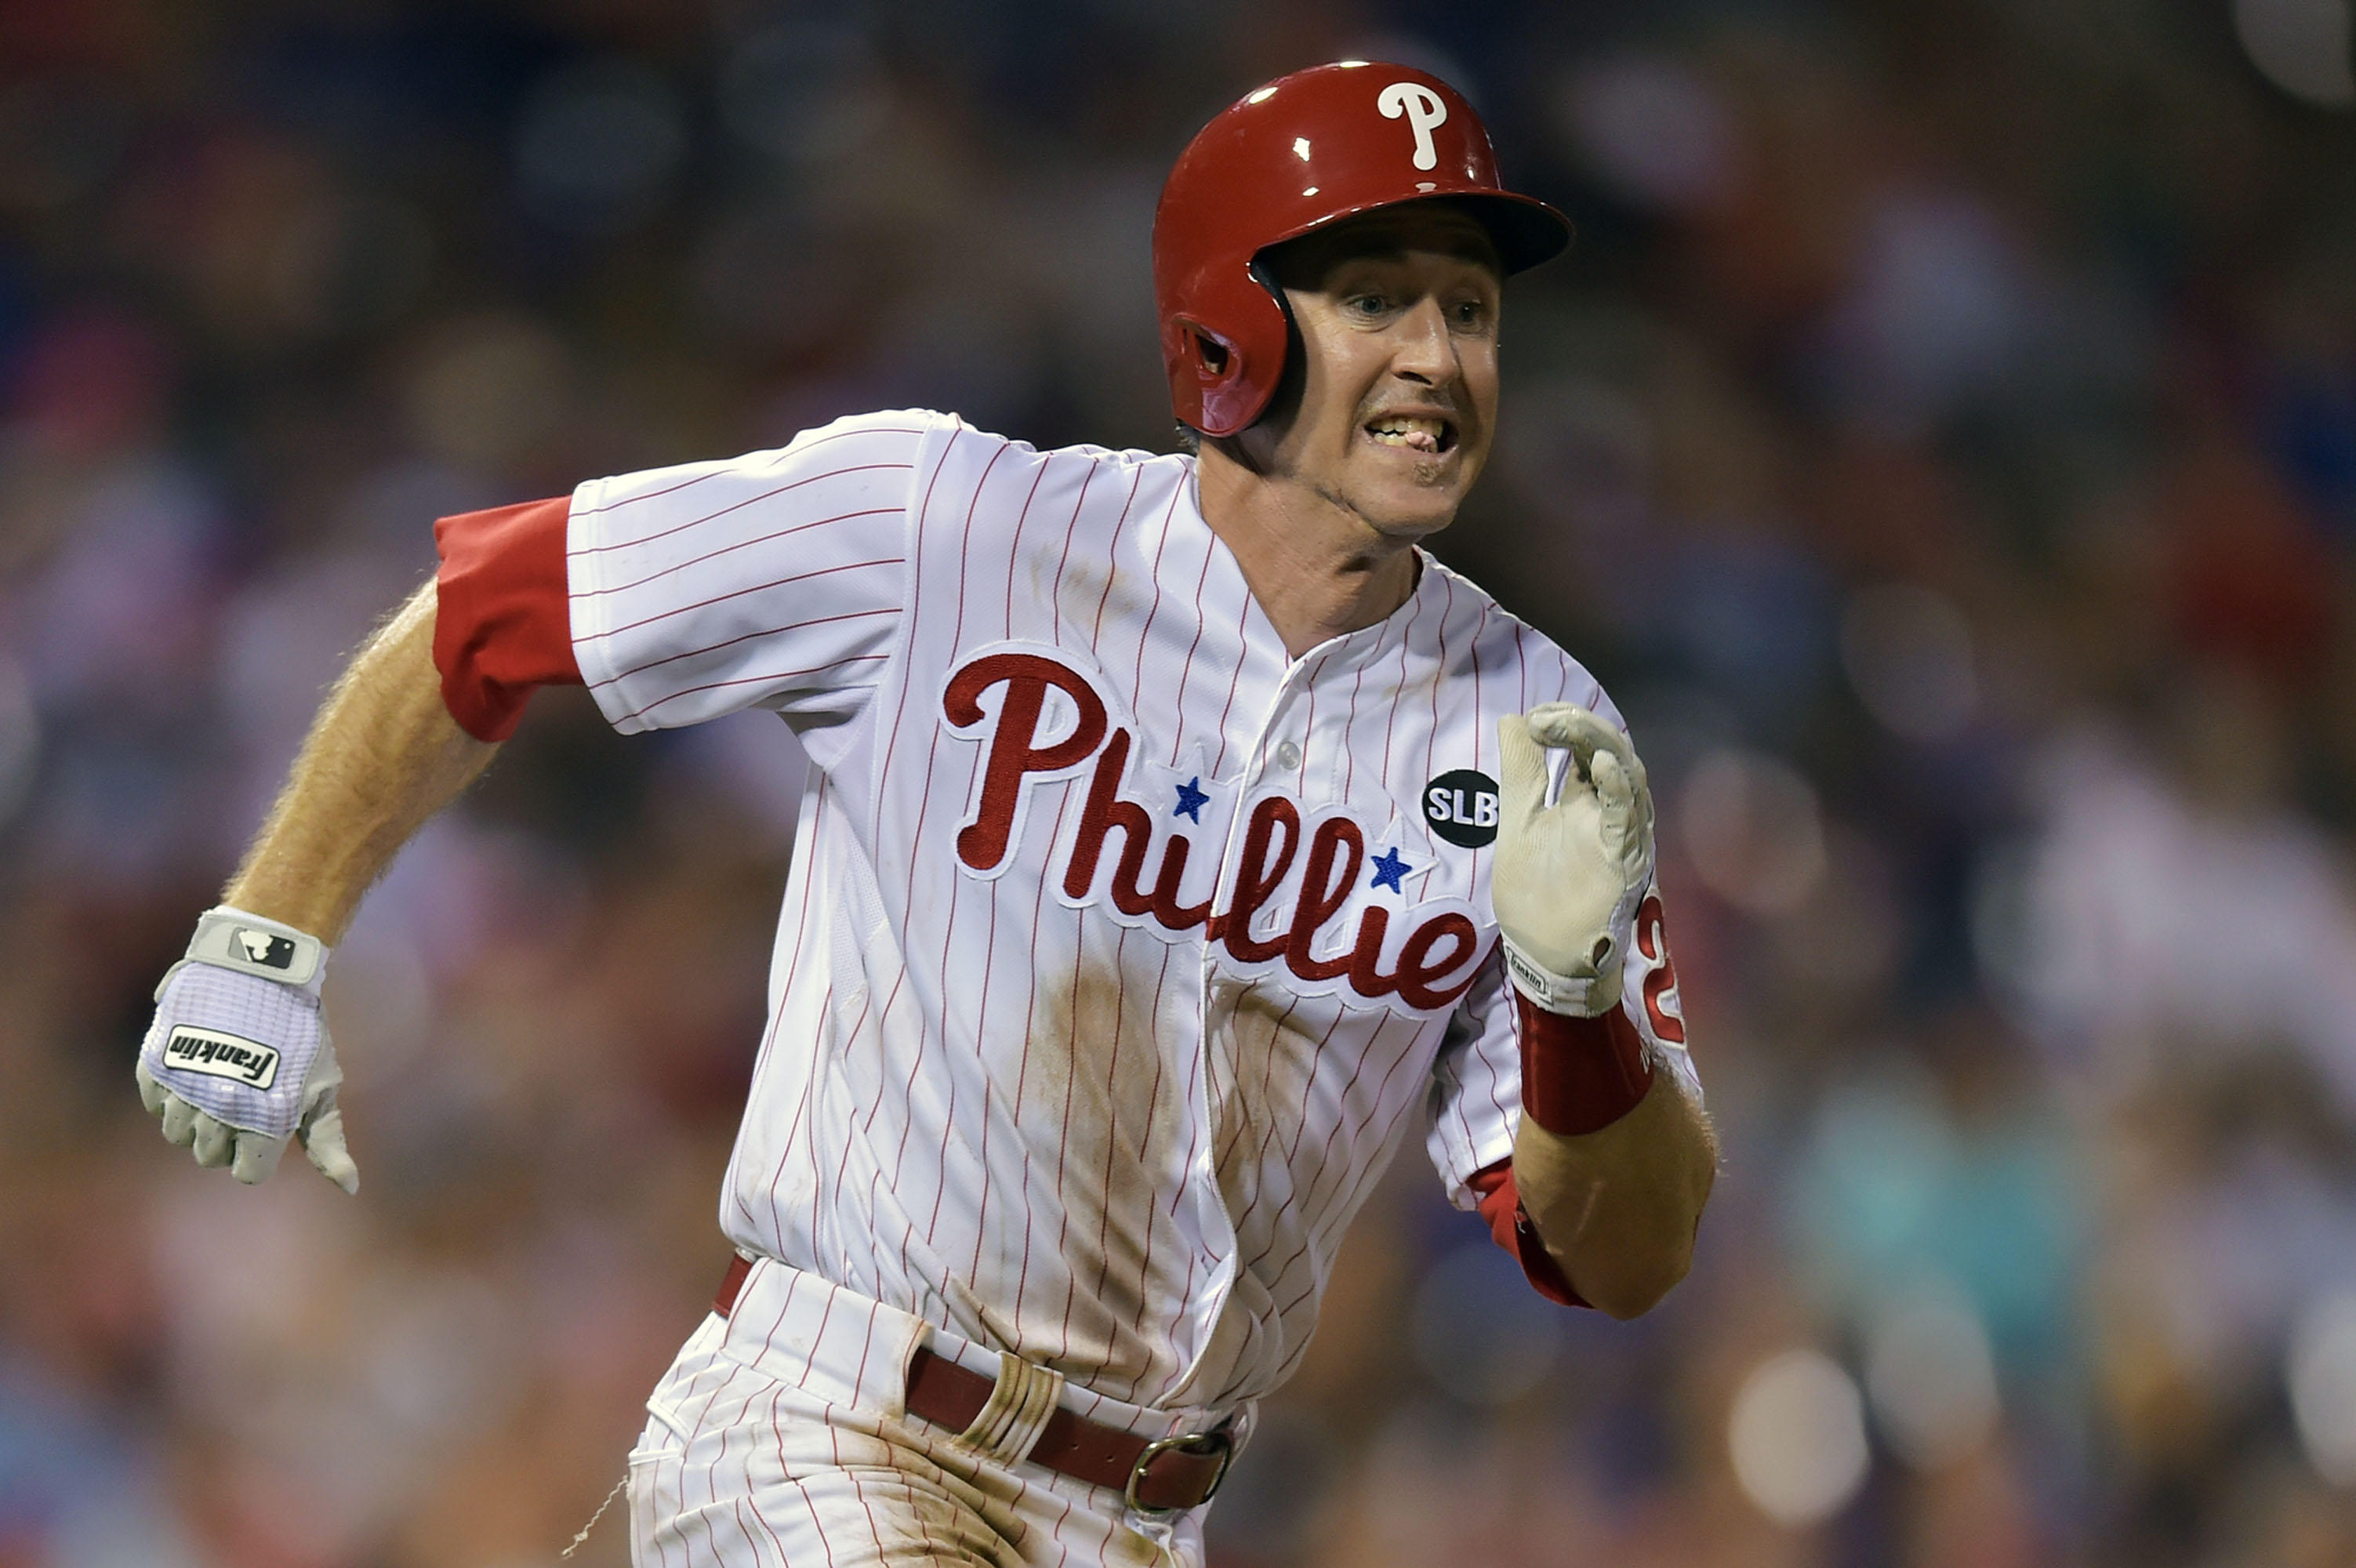 Chase Utley Traded to Dodgers, Ending 13-Year Run With Phillies - Bloomberg